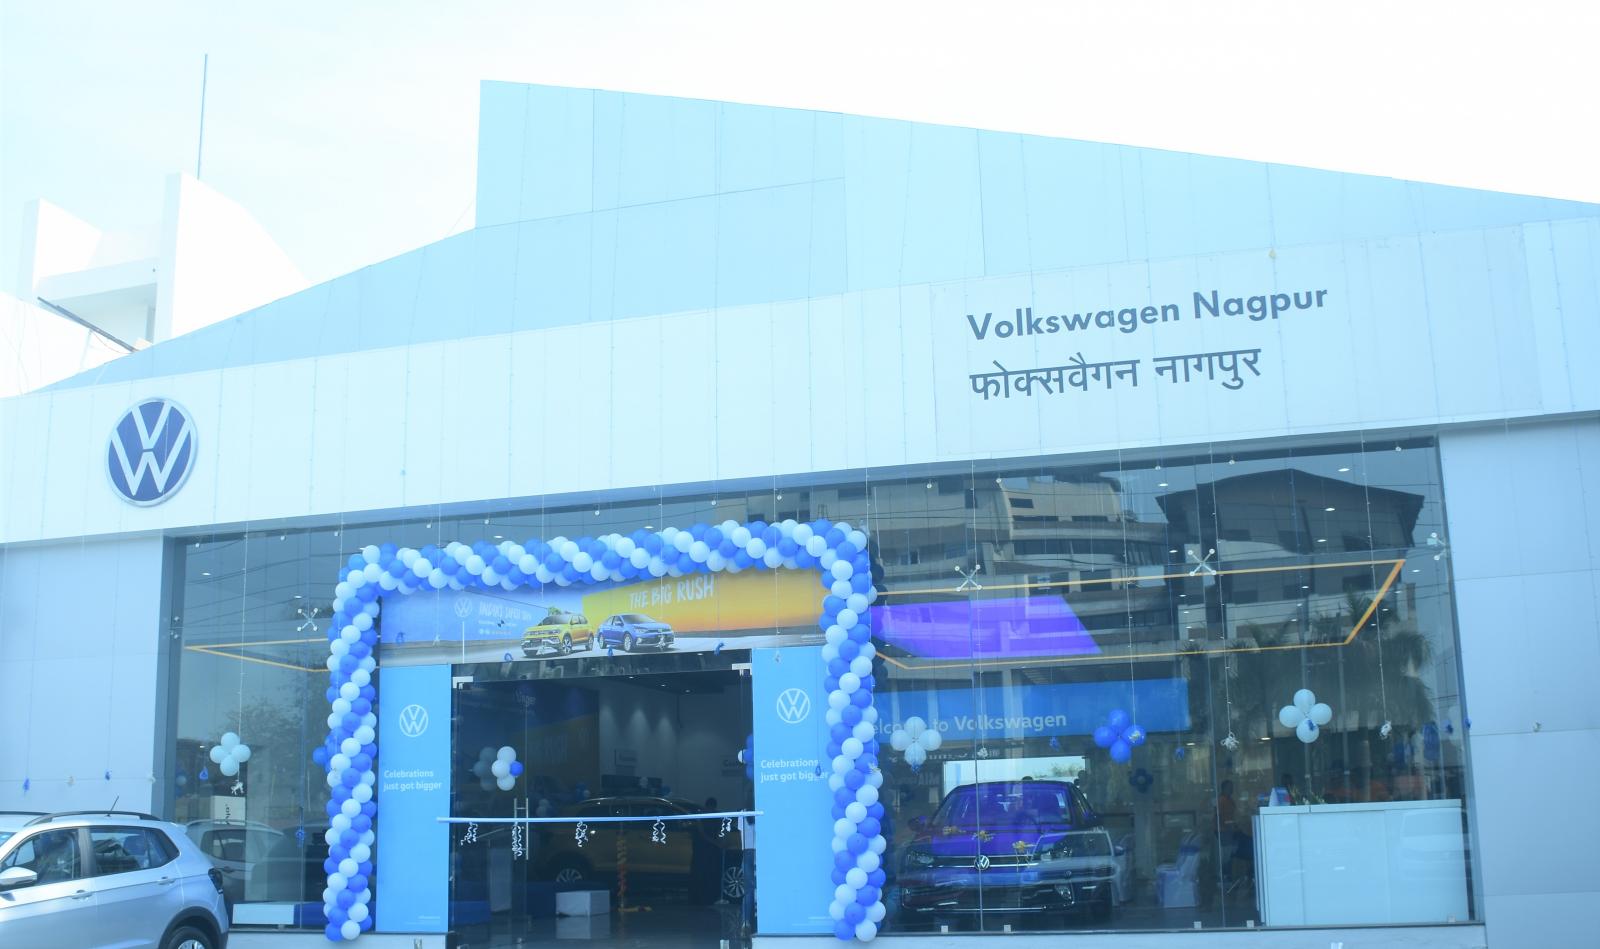 VW India Opens New Sales & Service Touchpoint in Nagpur